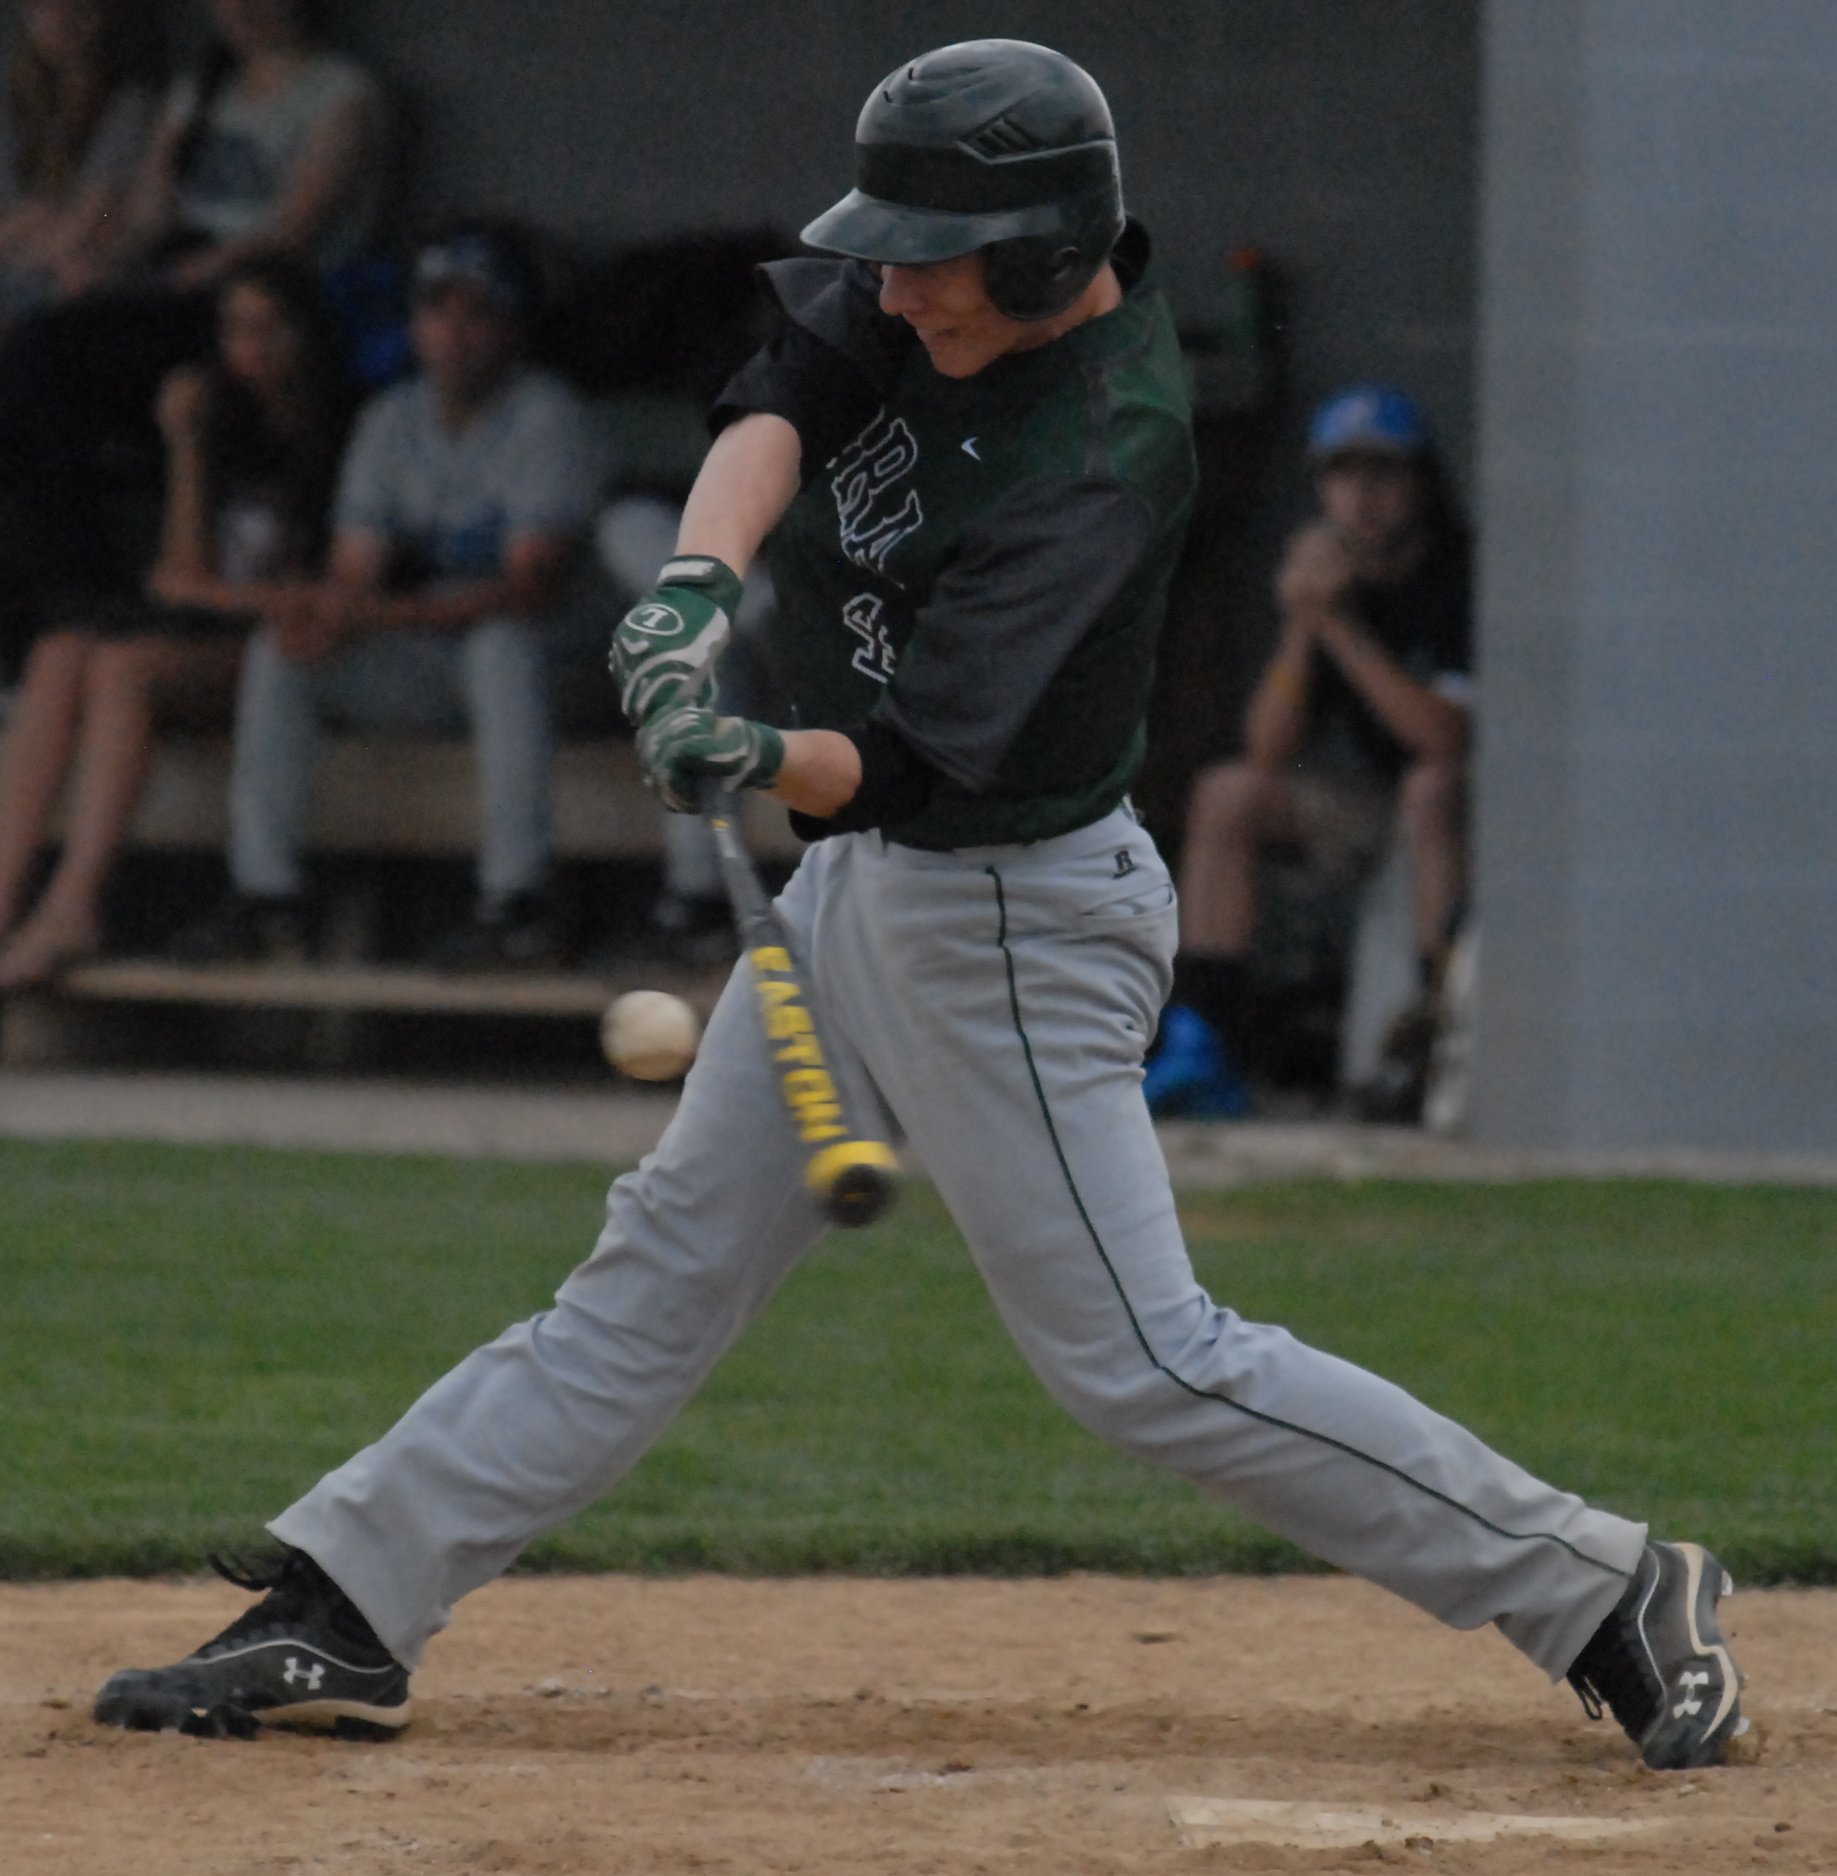 Derek Drewes (2014 SS) ripping an RBI single up the middle